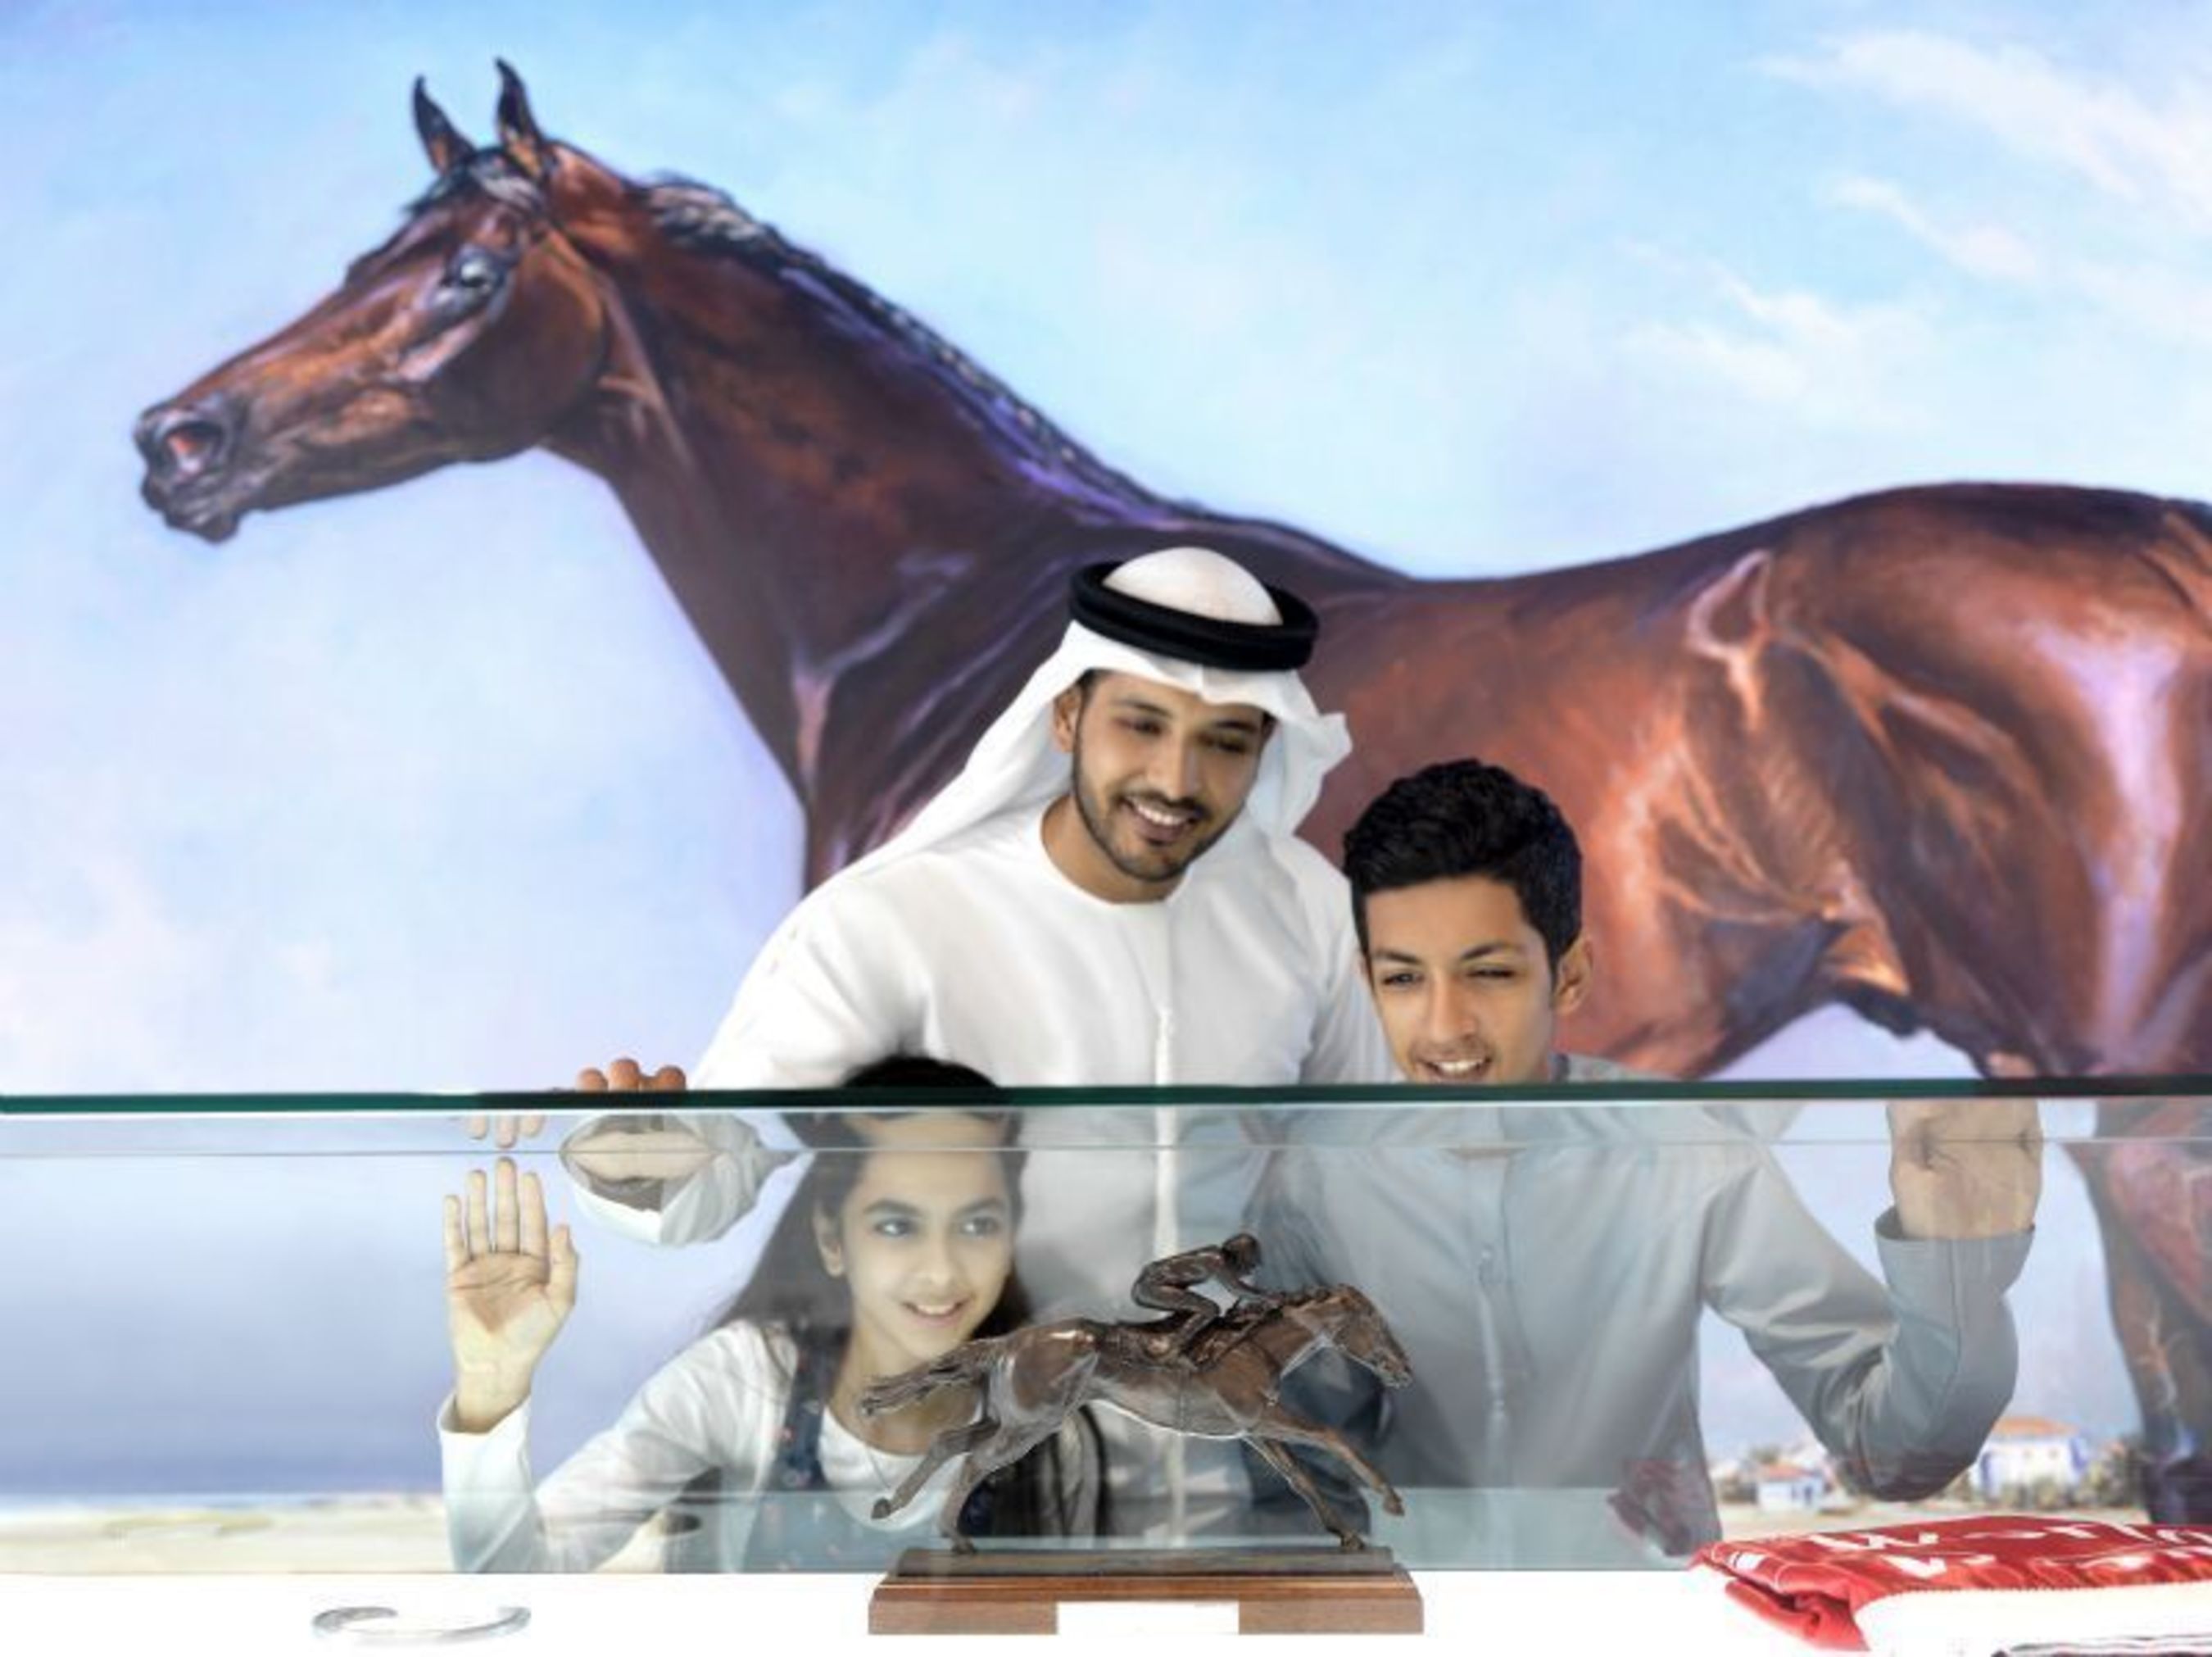 An exhibition which explores the shared development story of Dubai and its horseracing heritage, driven by the pioneering spirit of His Highness Sheikh Mohammed bin Rashid Al Maktoum, Vice-President and Prime Minister of the UAE and Ruler of Dubai, has opened to the public at Meydan Racecourse. (PRNewsFoto/Falcon and Associates)